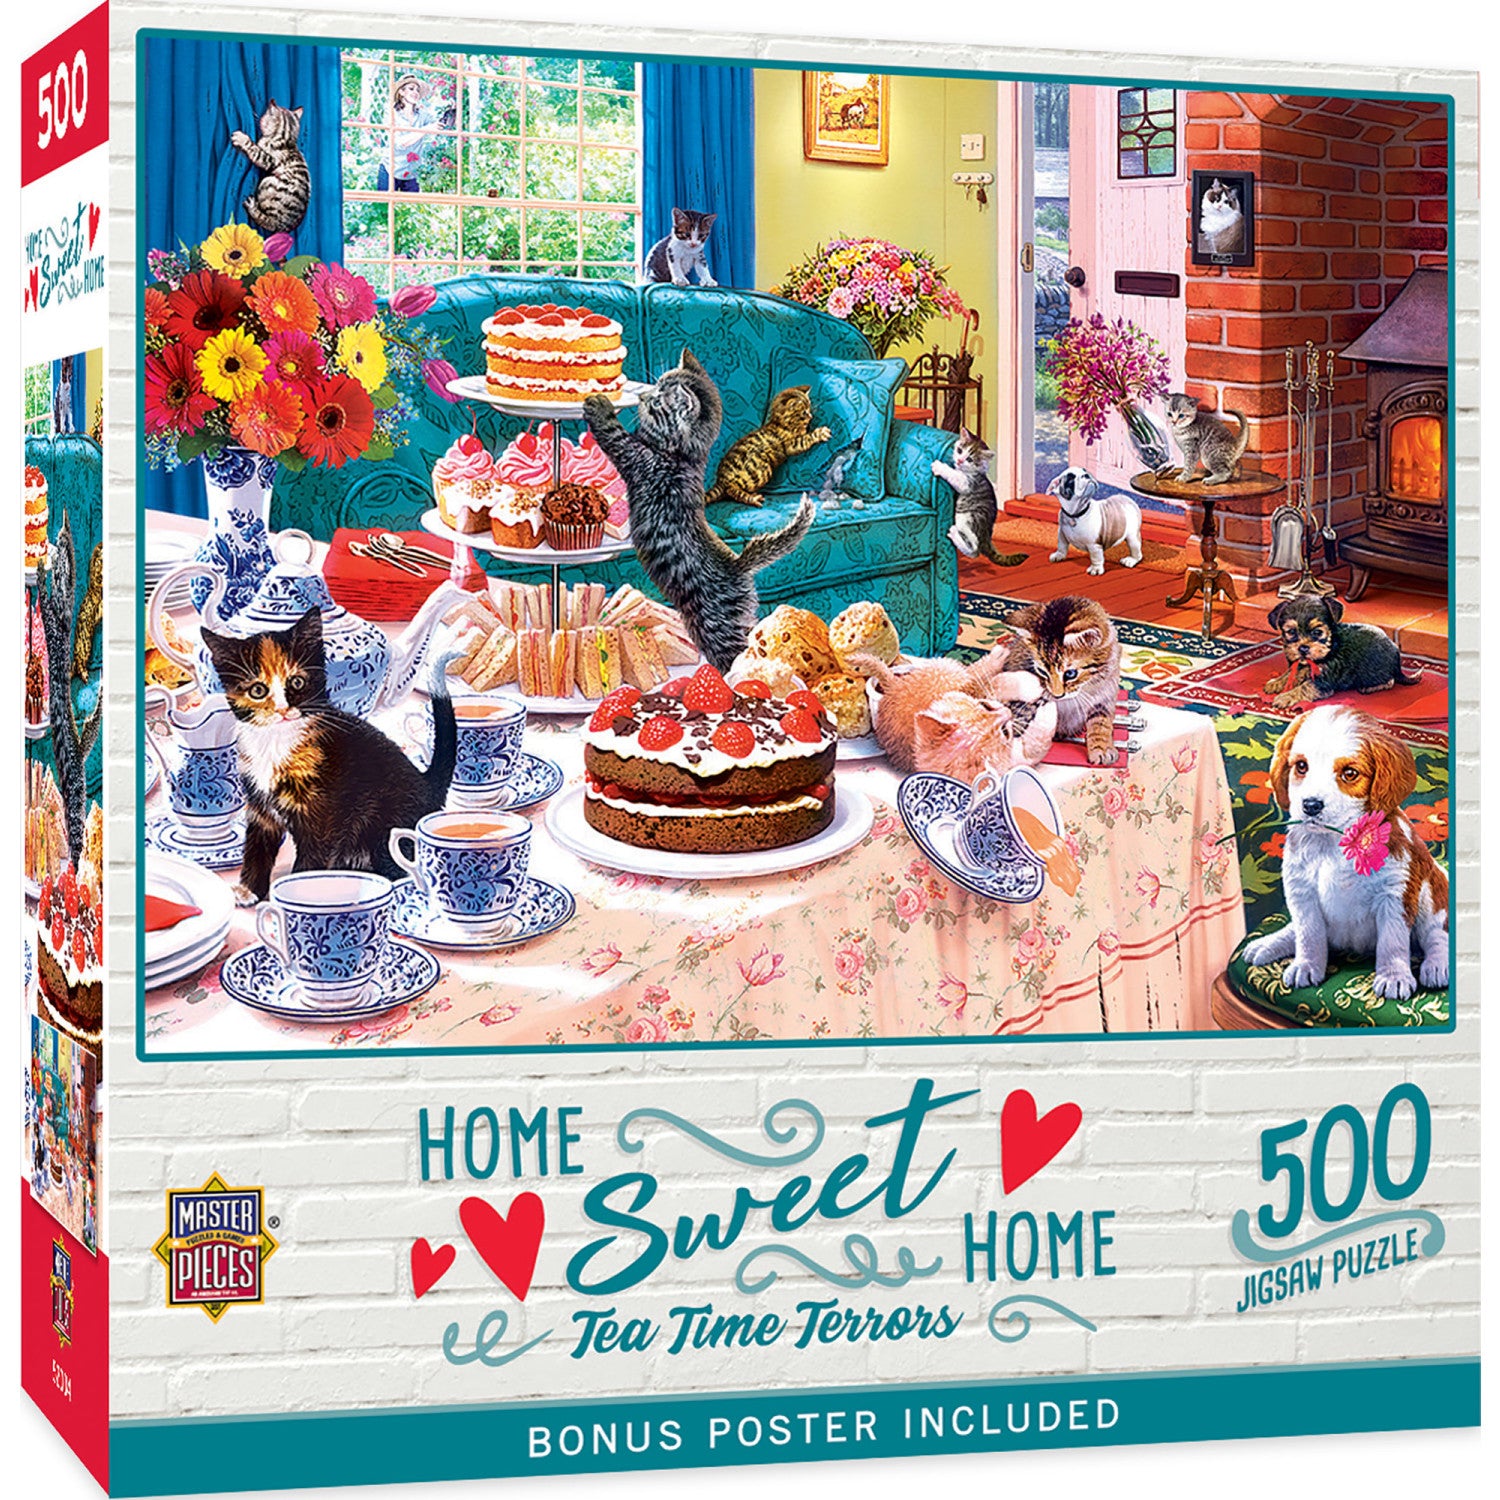 Home Sweet Home - Tea Time Terrors 500 Piece Jigsaw Puzzle